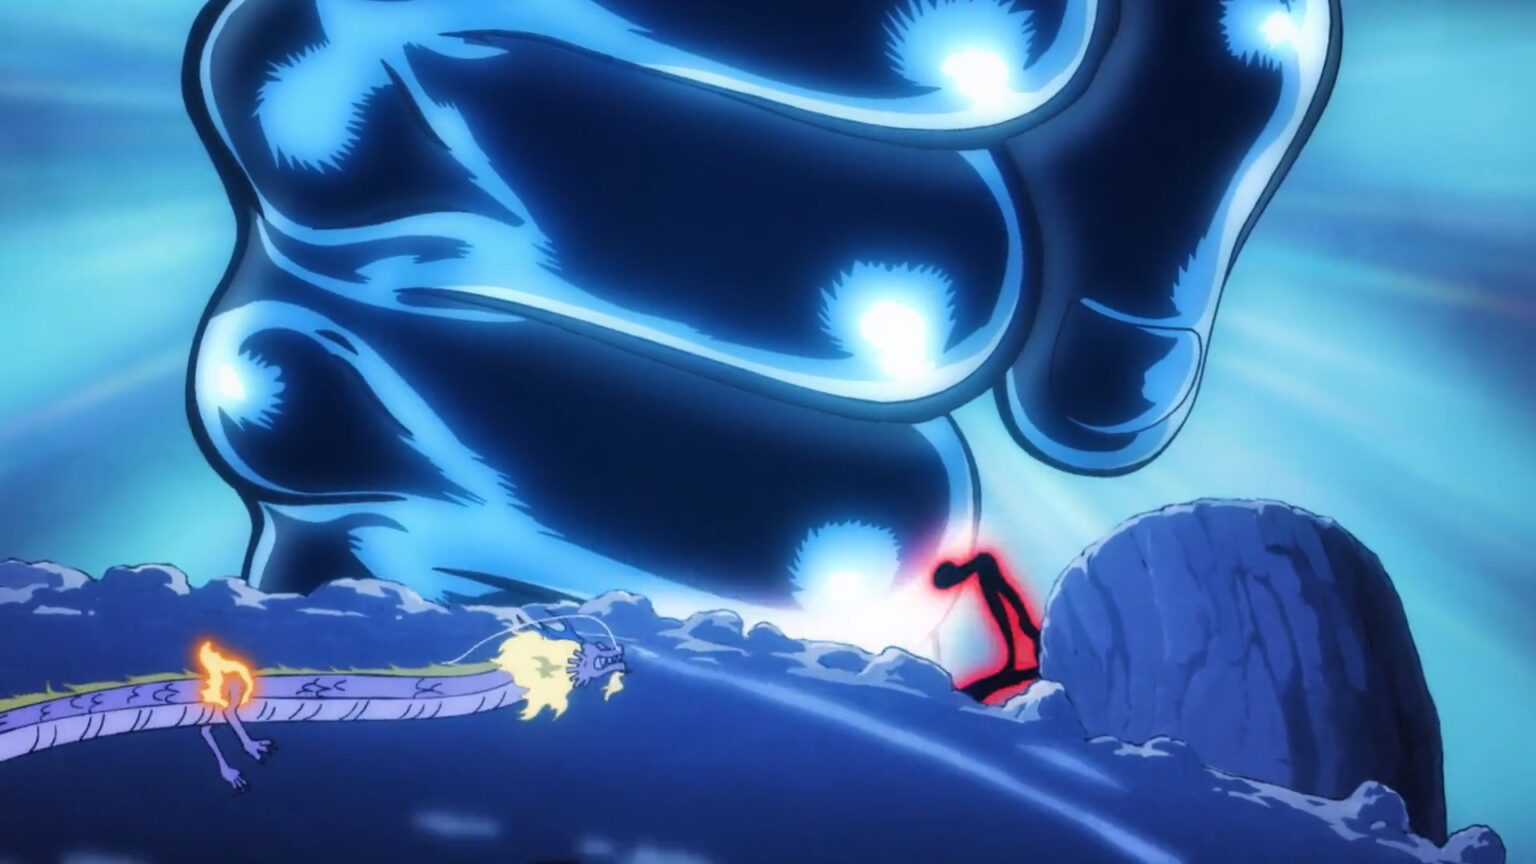 One Piece 1047 Luffy launches his ultimate attack on Kaido.